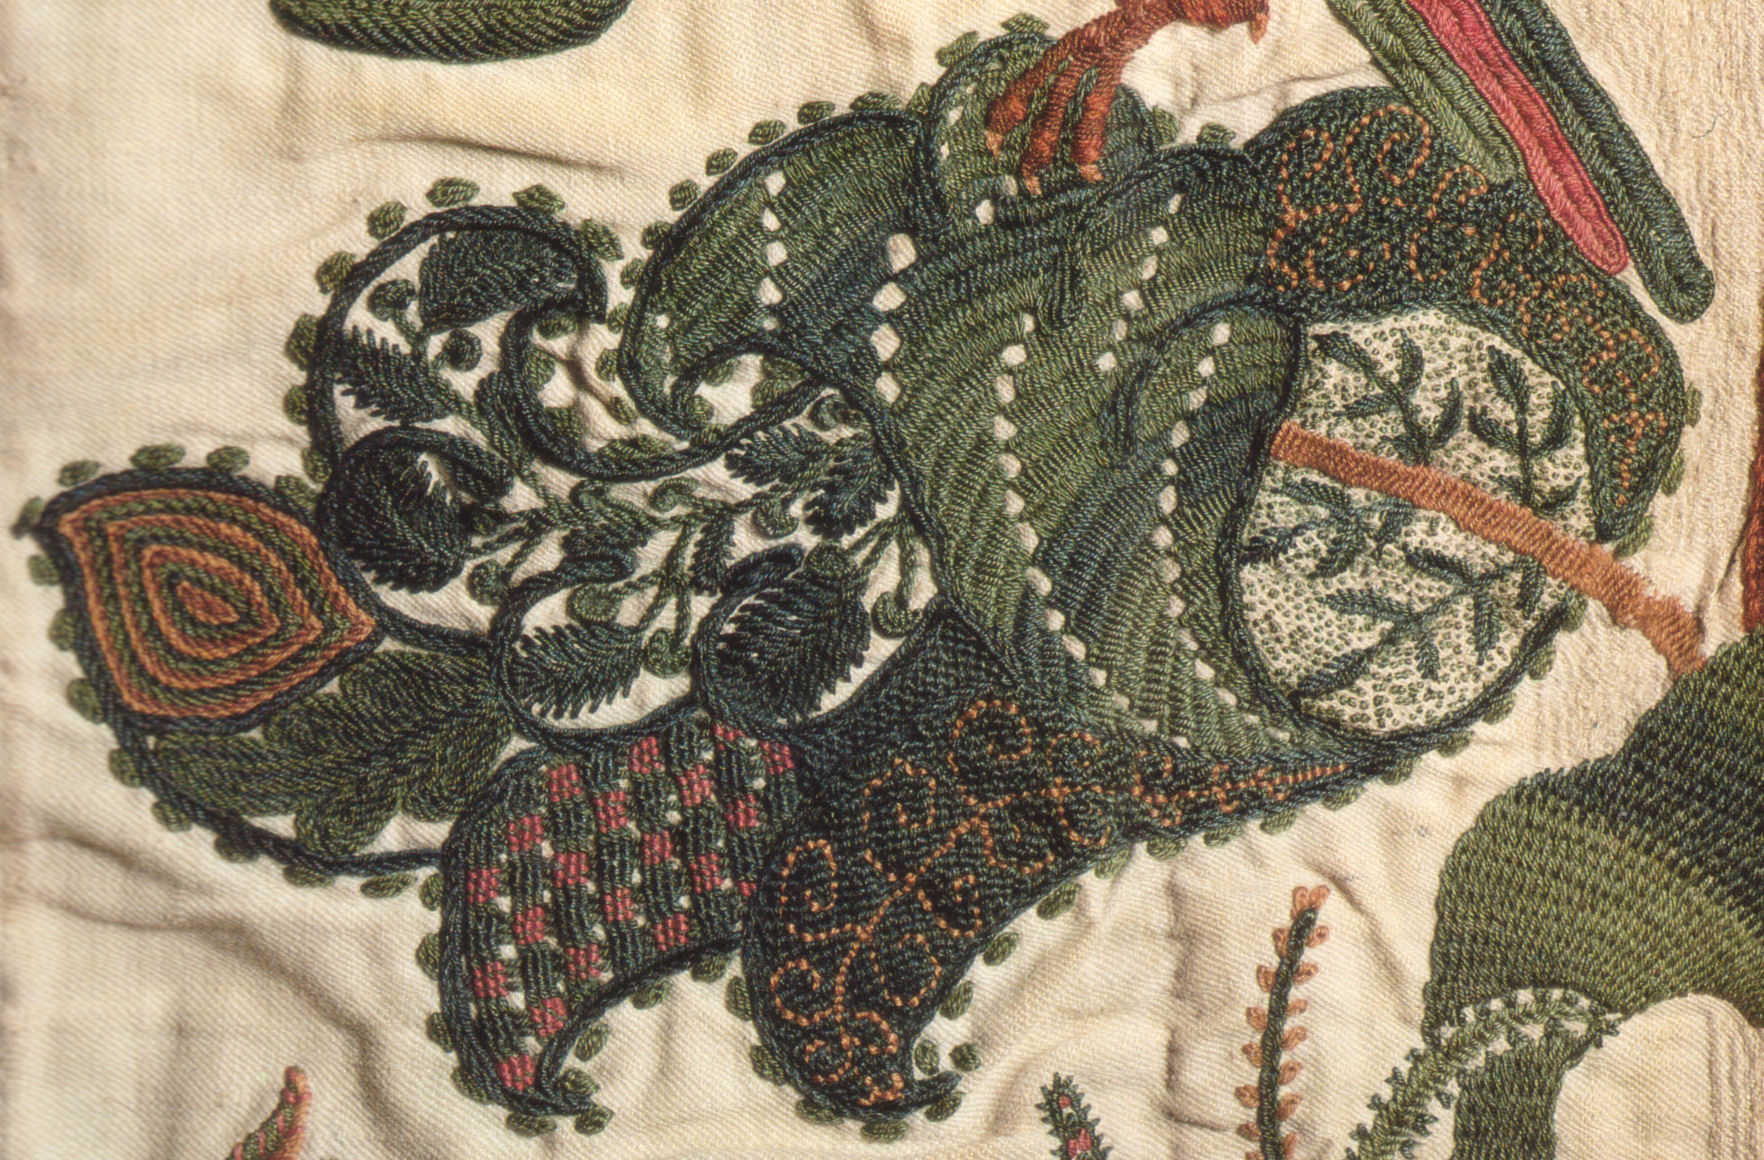 Jacobean Embroidery Patterns Free Crewel Embroidery Wikipedia